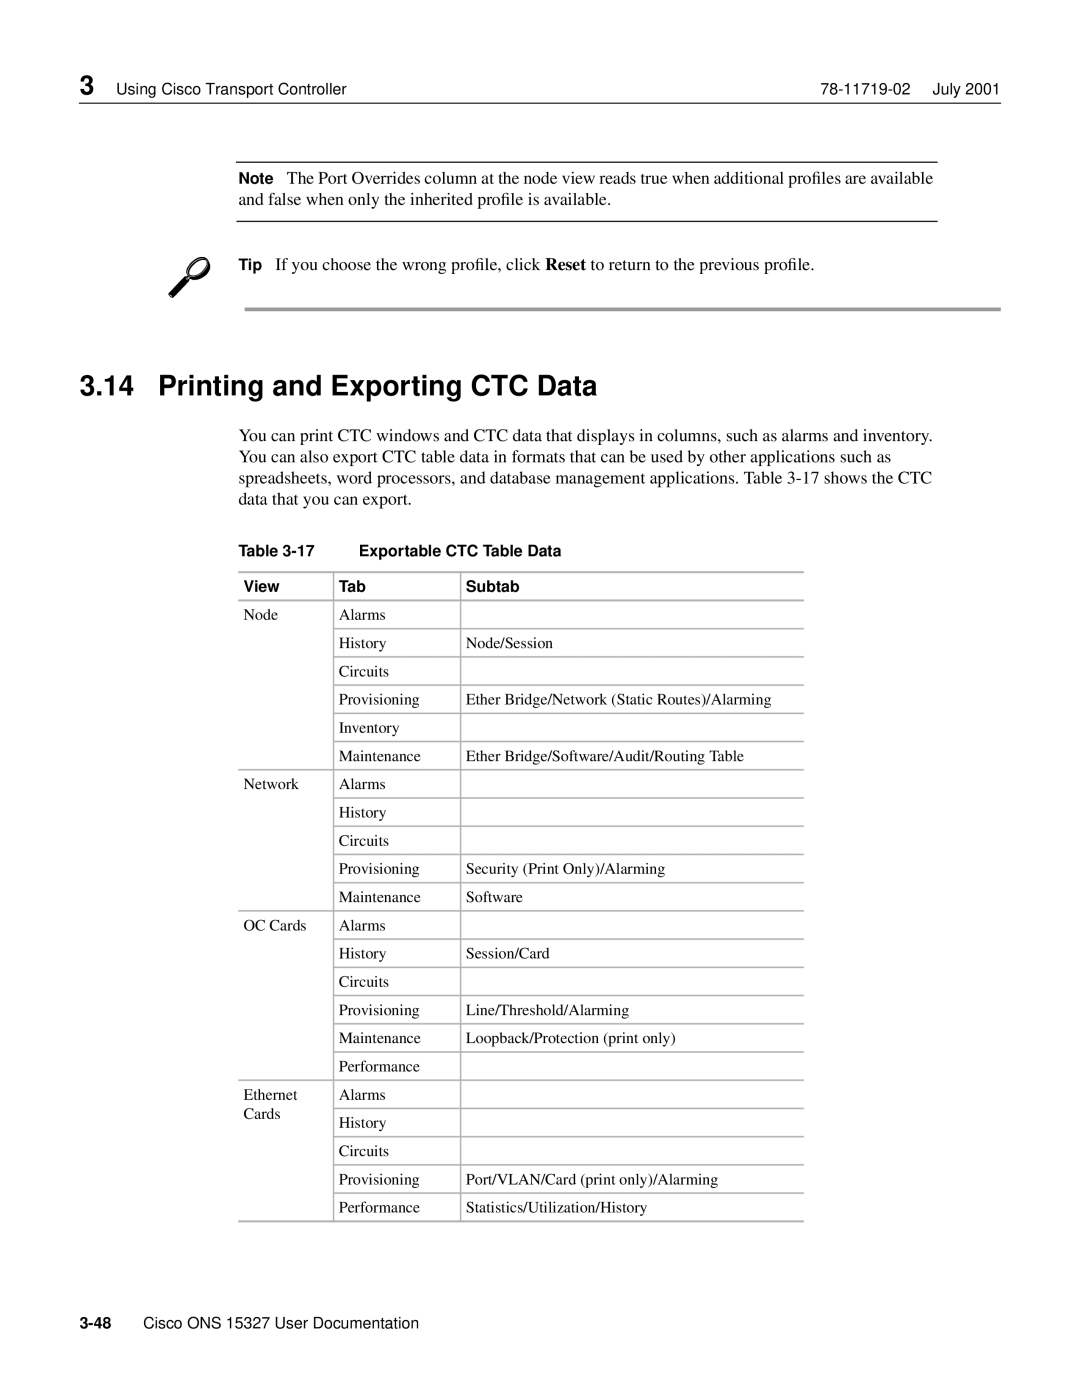 Cisco Systems ONS 15327 manual Printing and Exporting CTC Data 